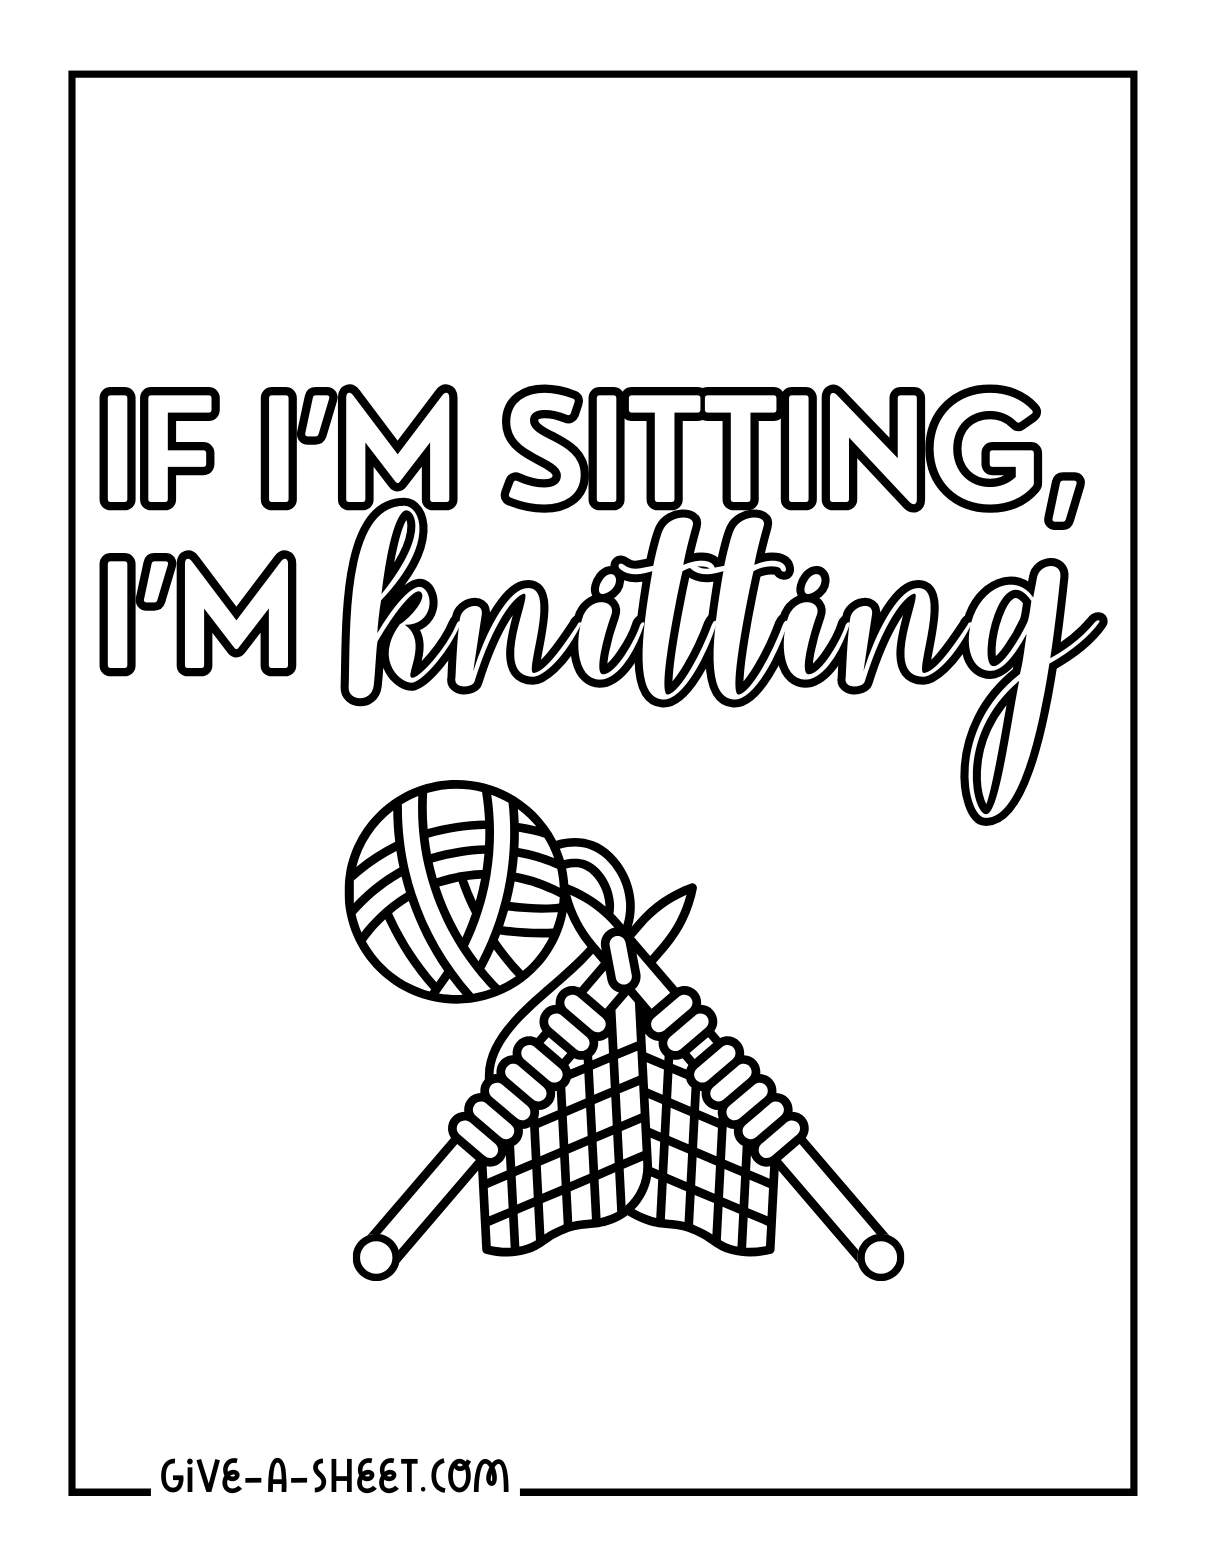 Knitting spool coloring page for kids.